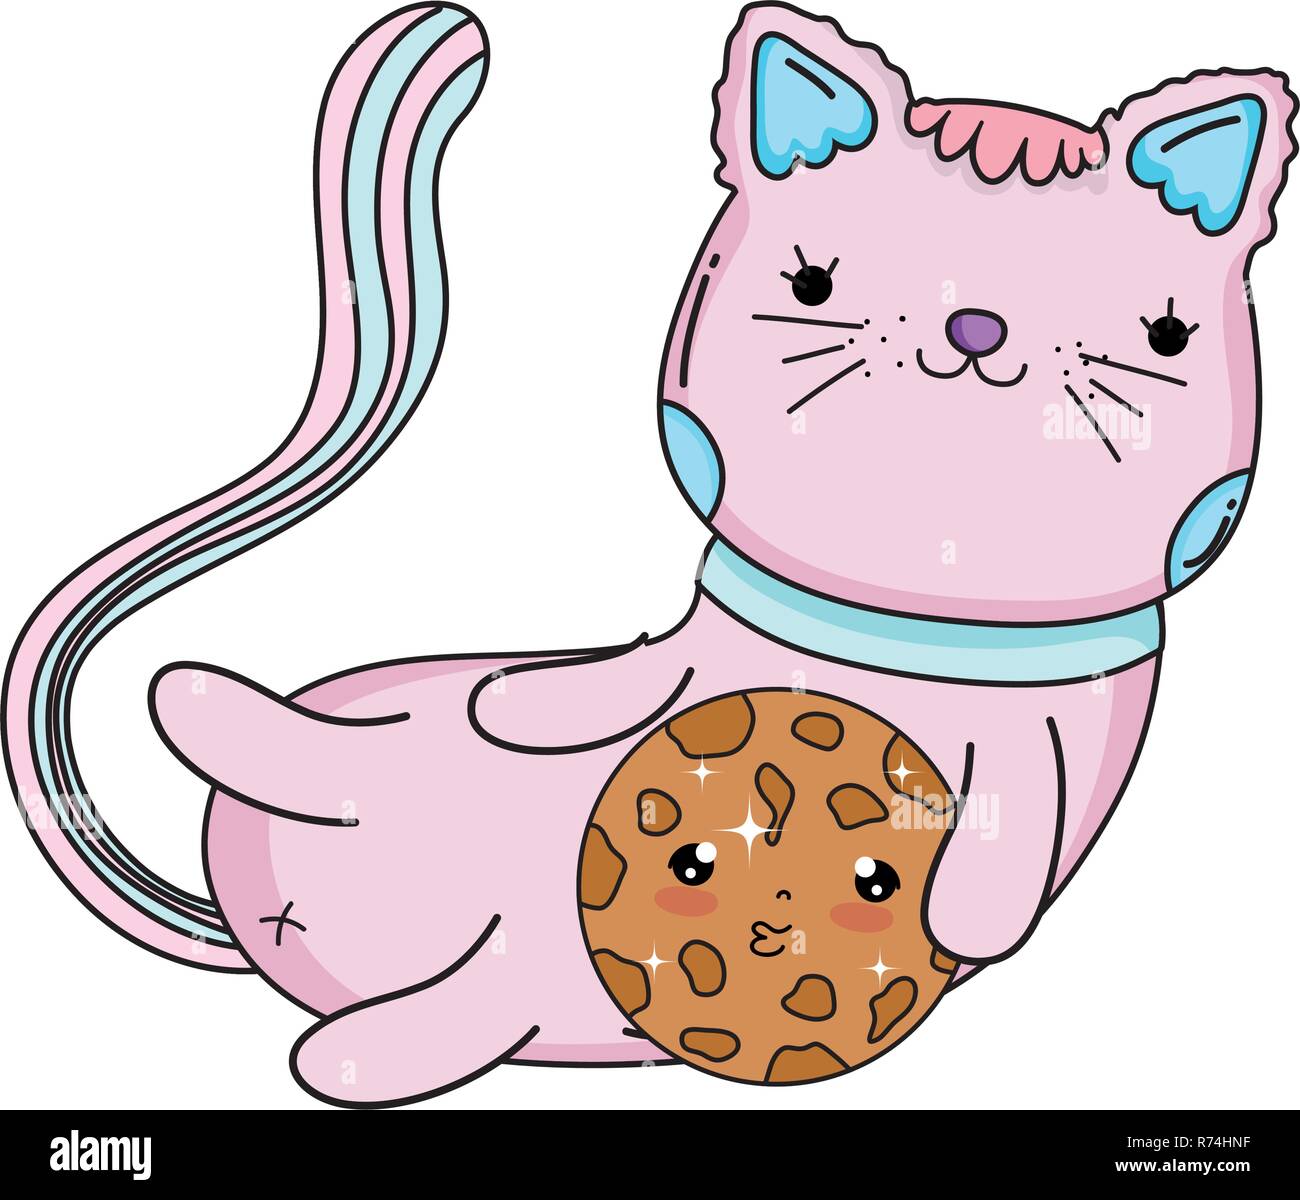 Adorable Cat Donuts Inspired by Donut-Shaped Anime Cats